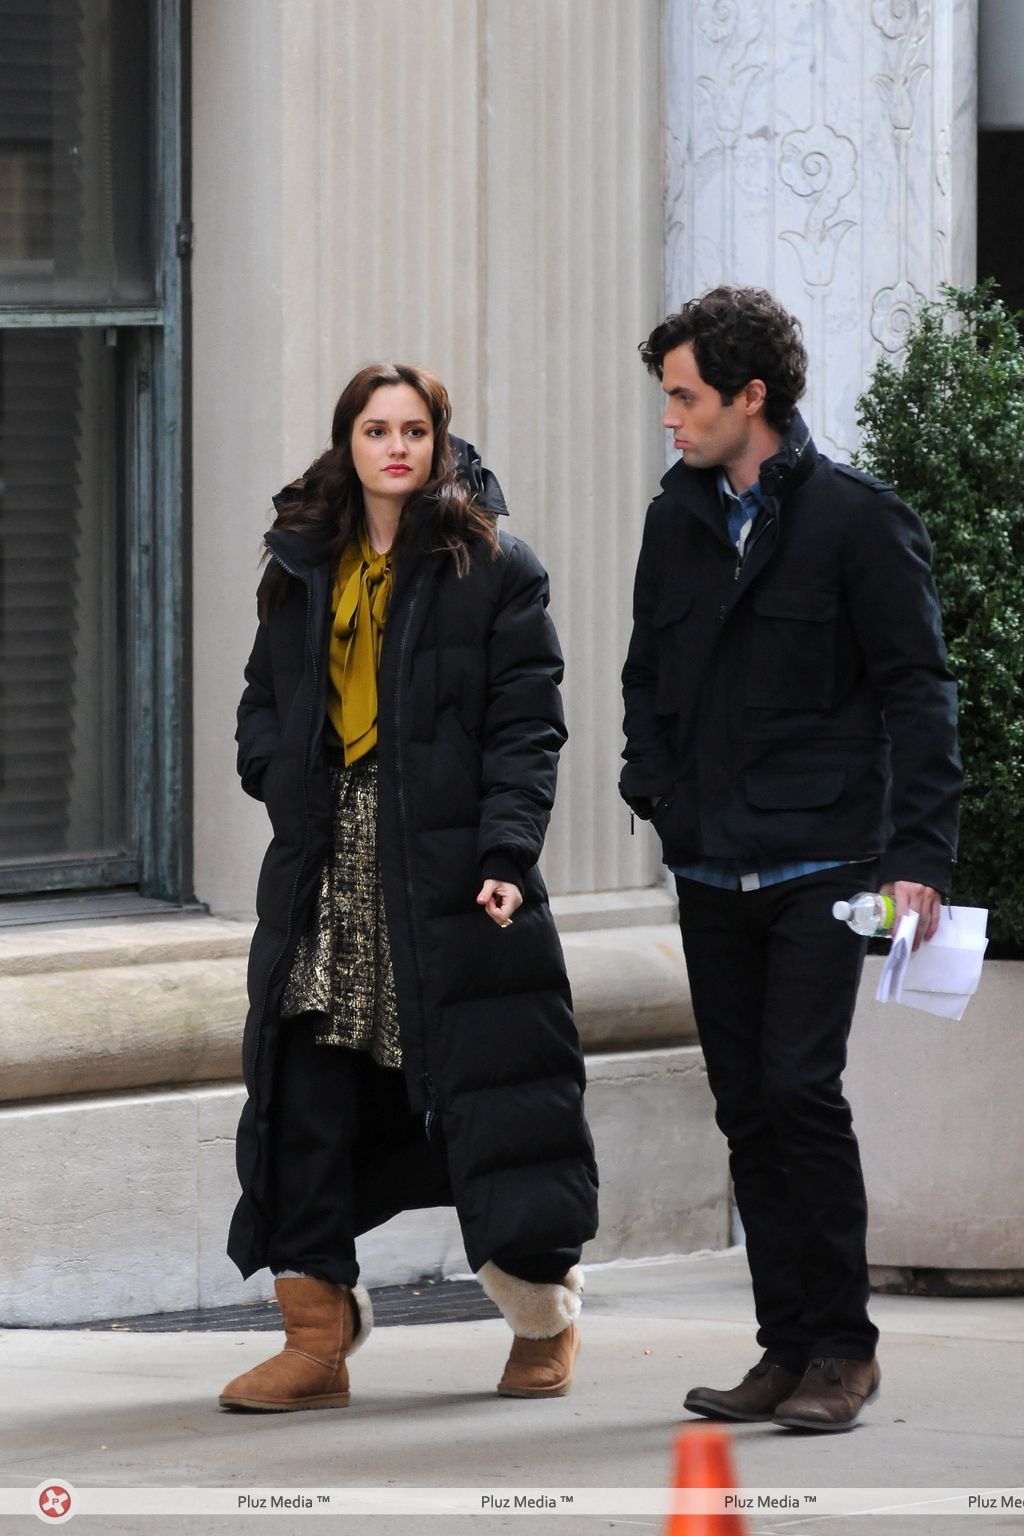 Celebrities on the set of 'Gossip Girl' filming on location | Picture 114470